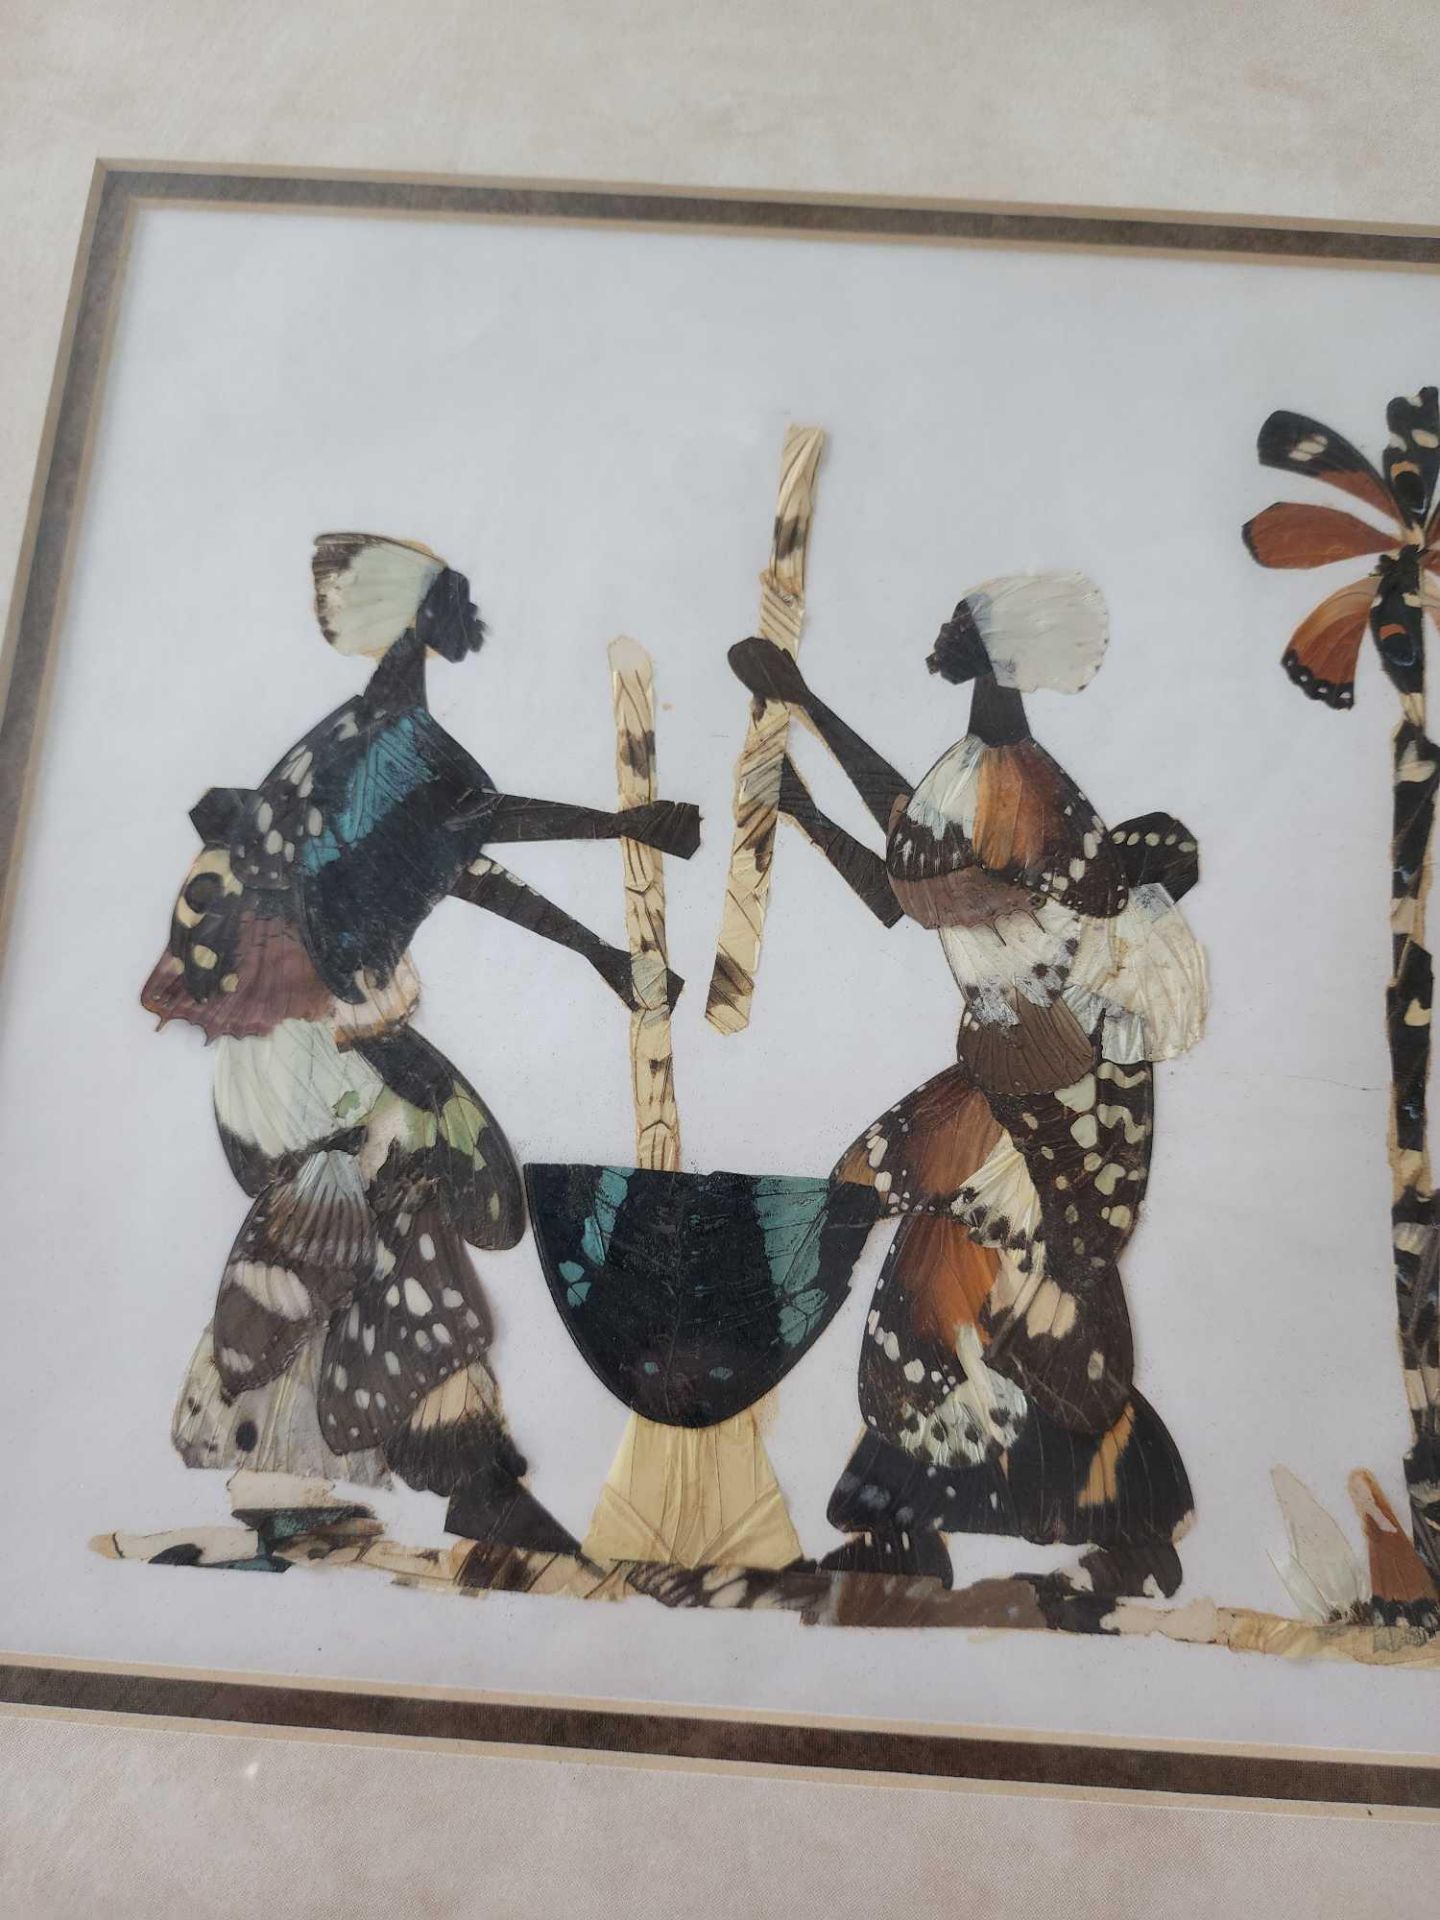 Handmade Authentic African Art made from Butterfly Wings - Image 6 of 7